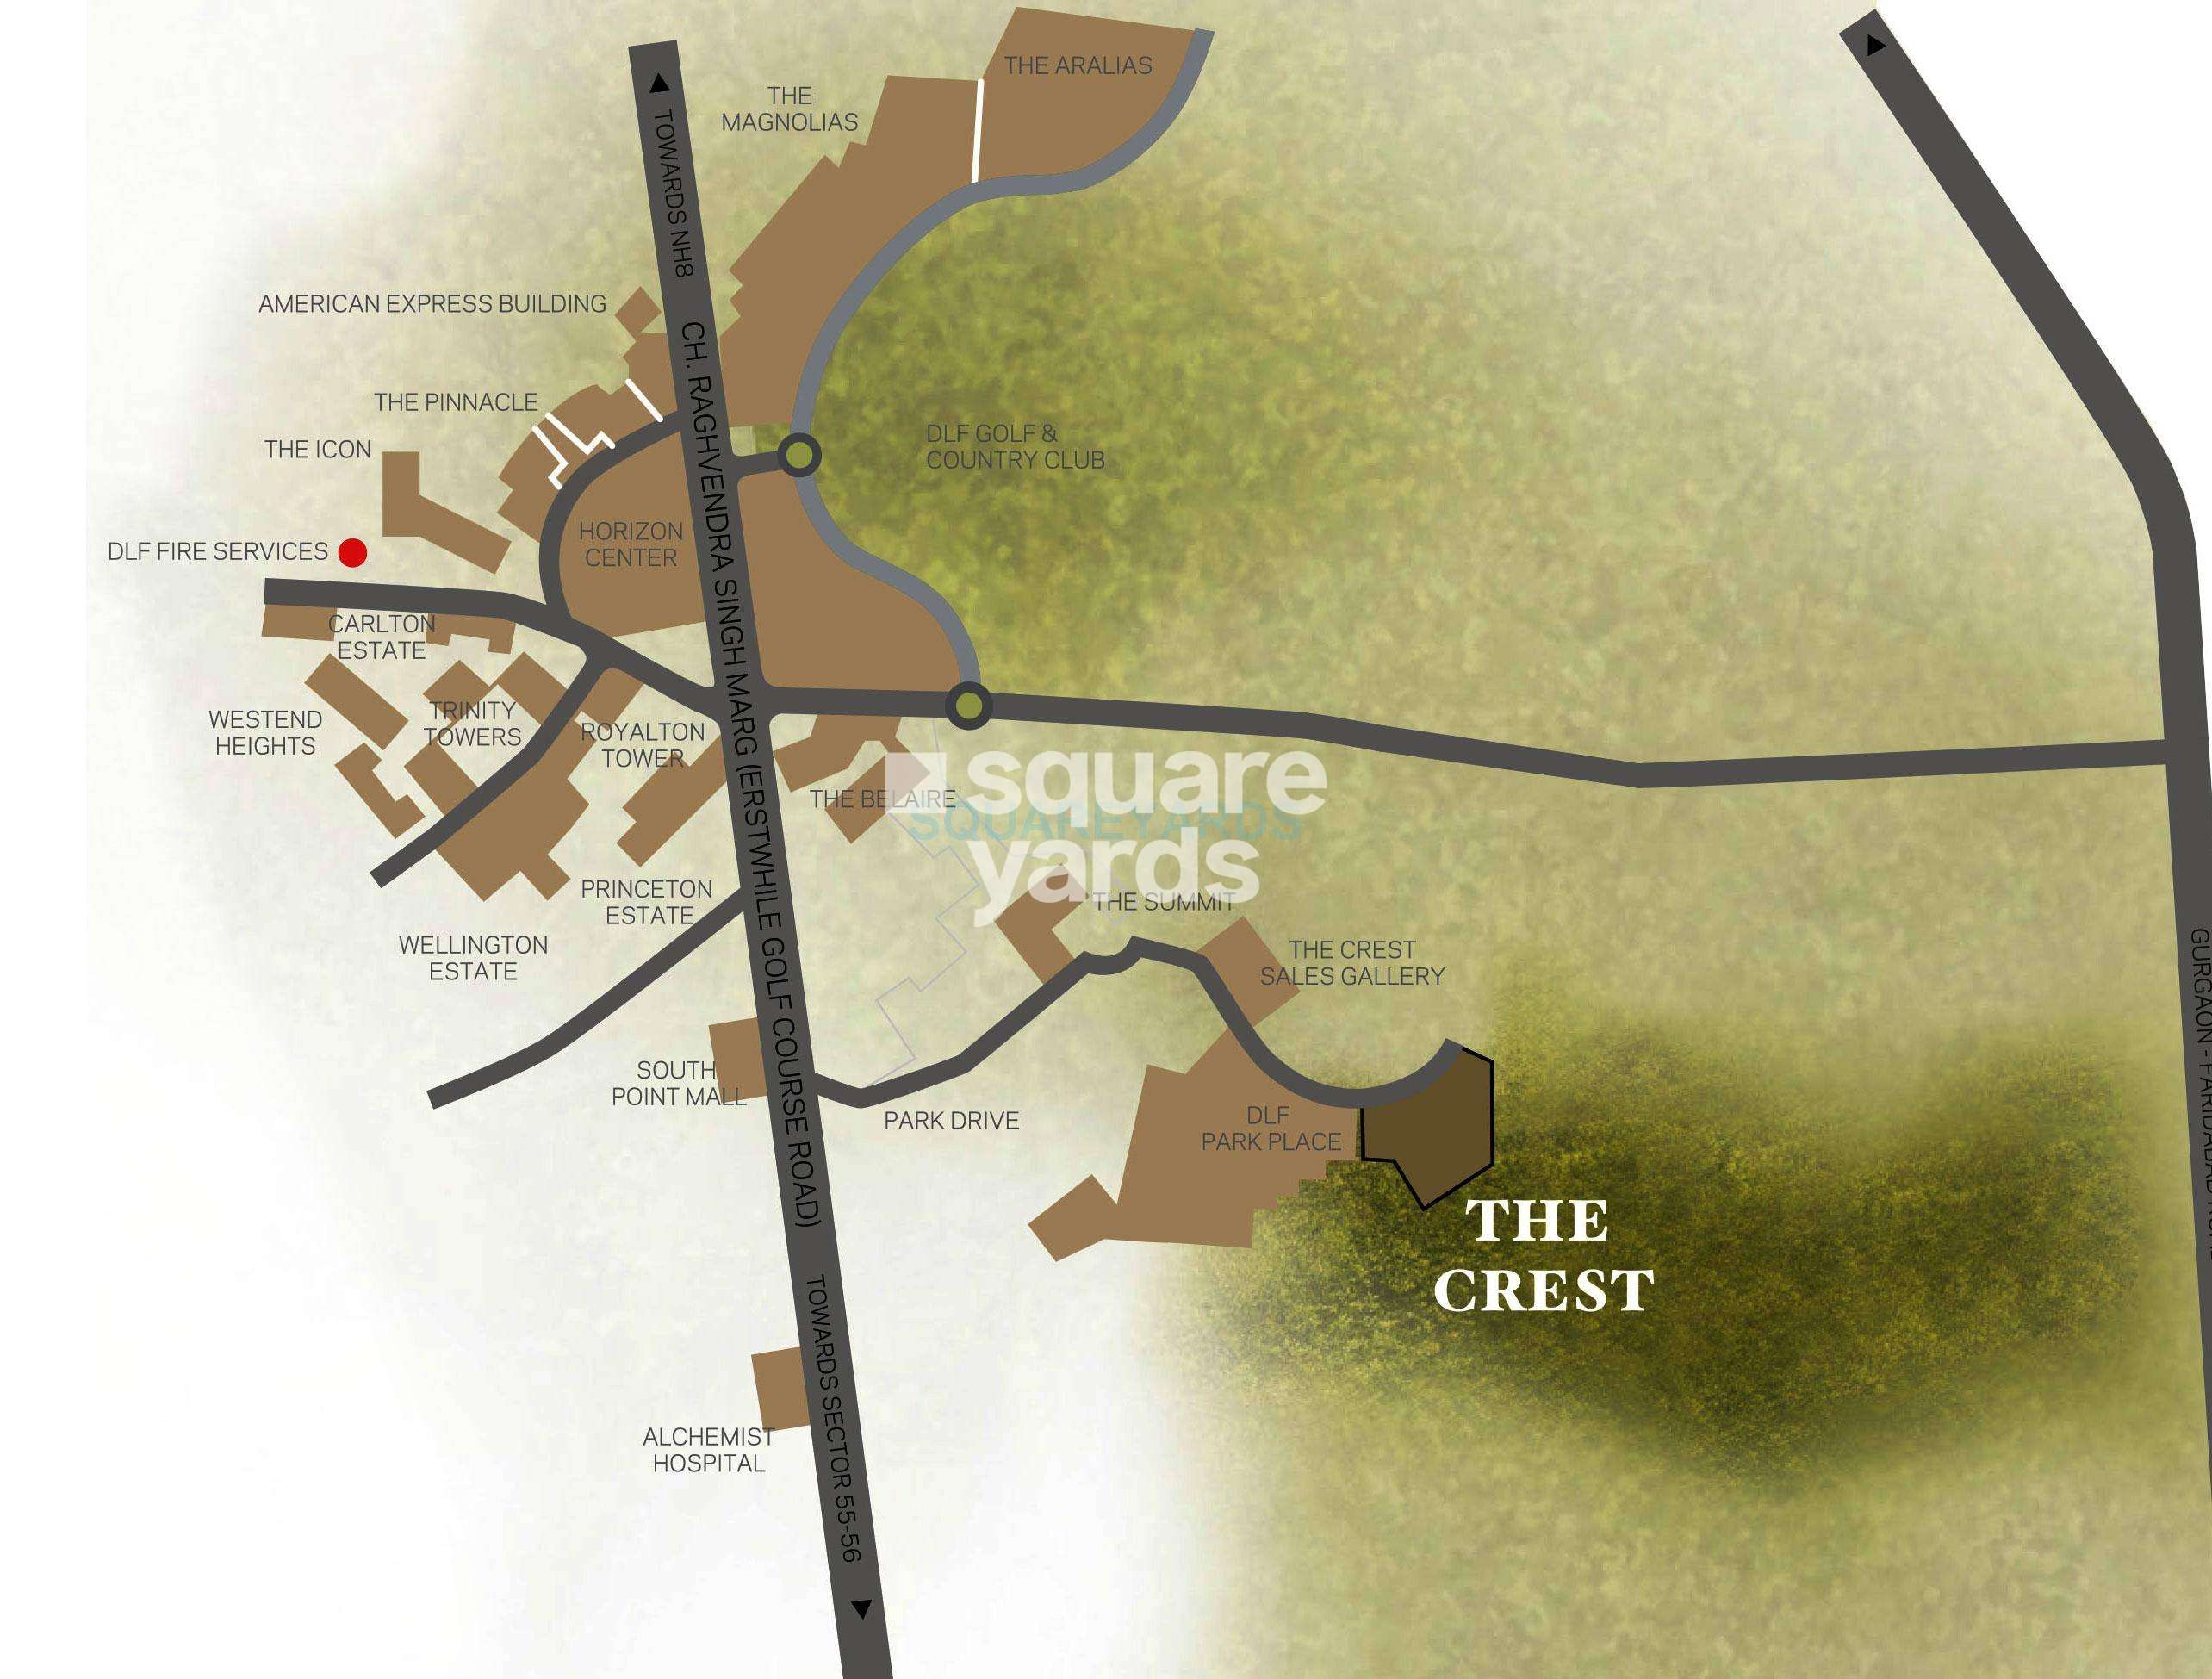 dlf the crest phase ii project location image1